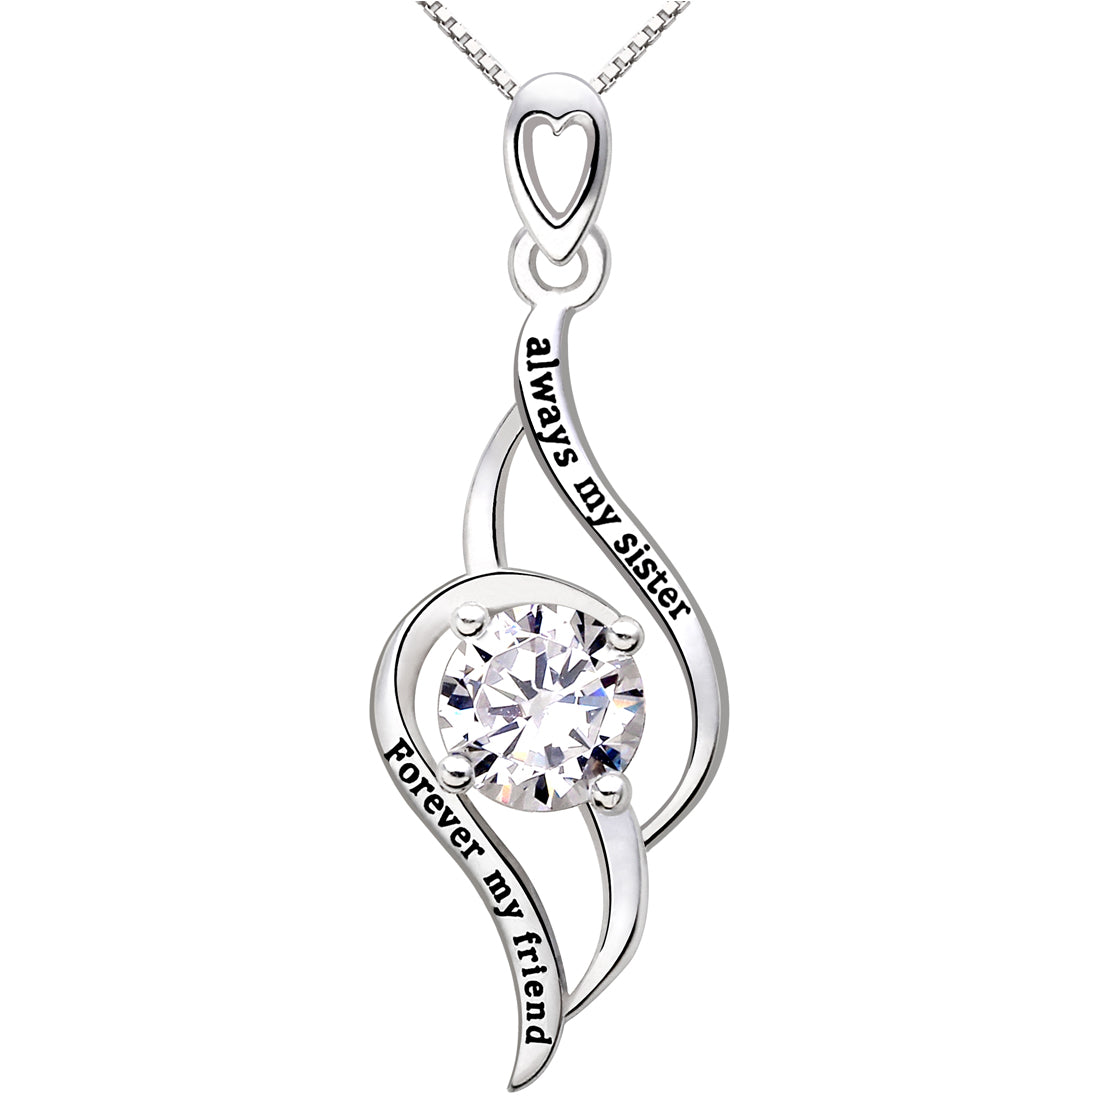 ALOV Jewelry Sterling Silver "always my sister Forever my friend" Love Cubic Zirconia Pendant Necklace